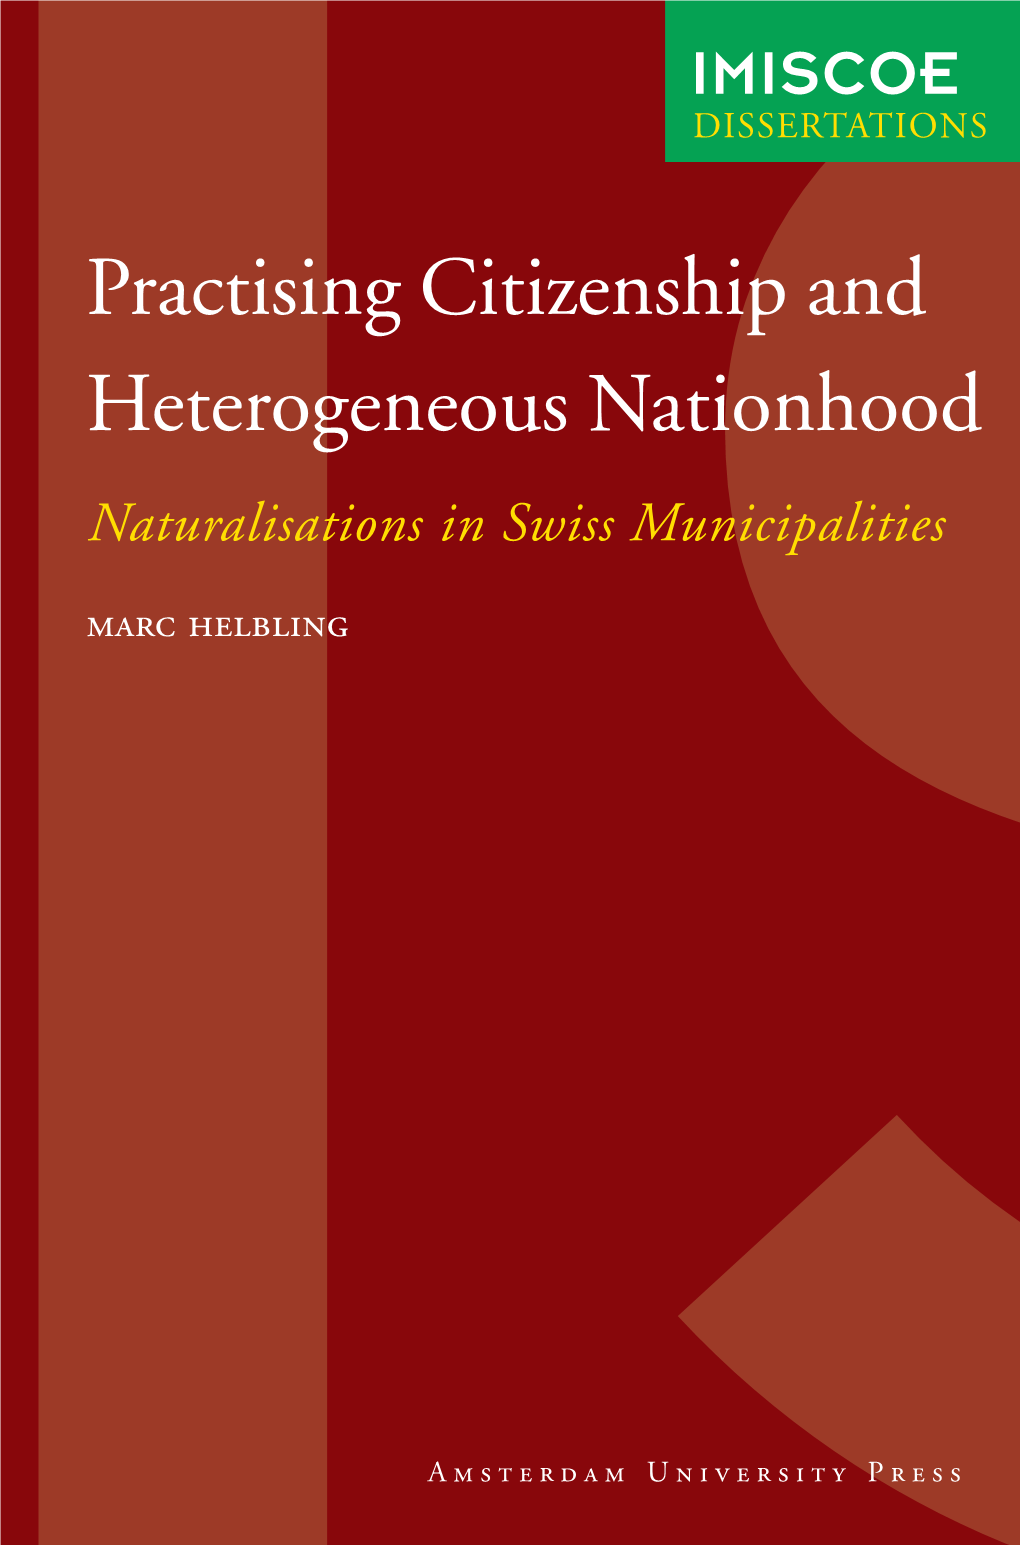 Practising Citizenship and Heterogeneous Nationhood IMISCOE (International Migration, Integration and Social Cohesion)